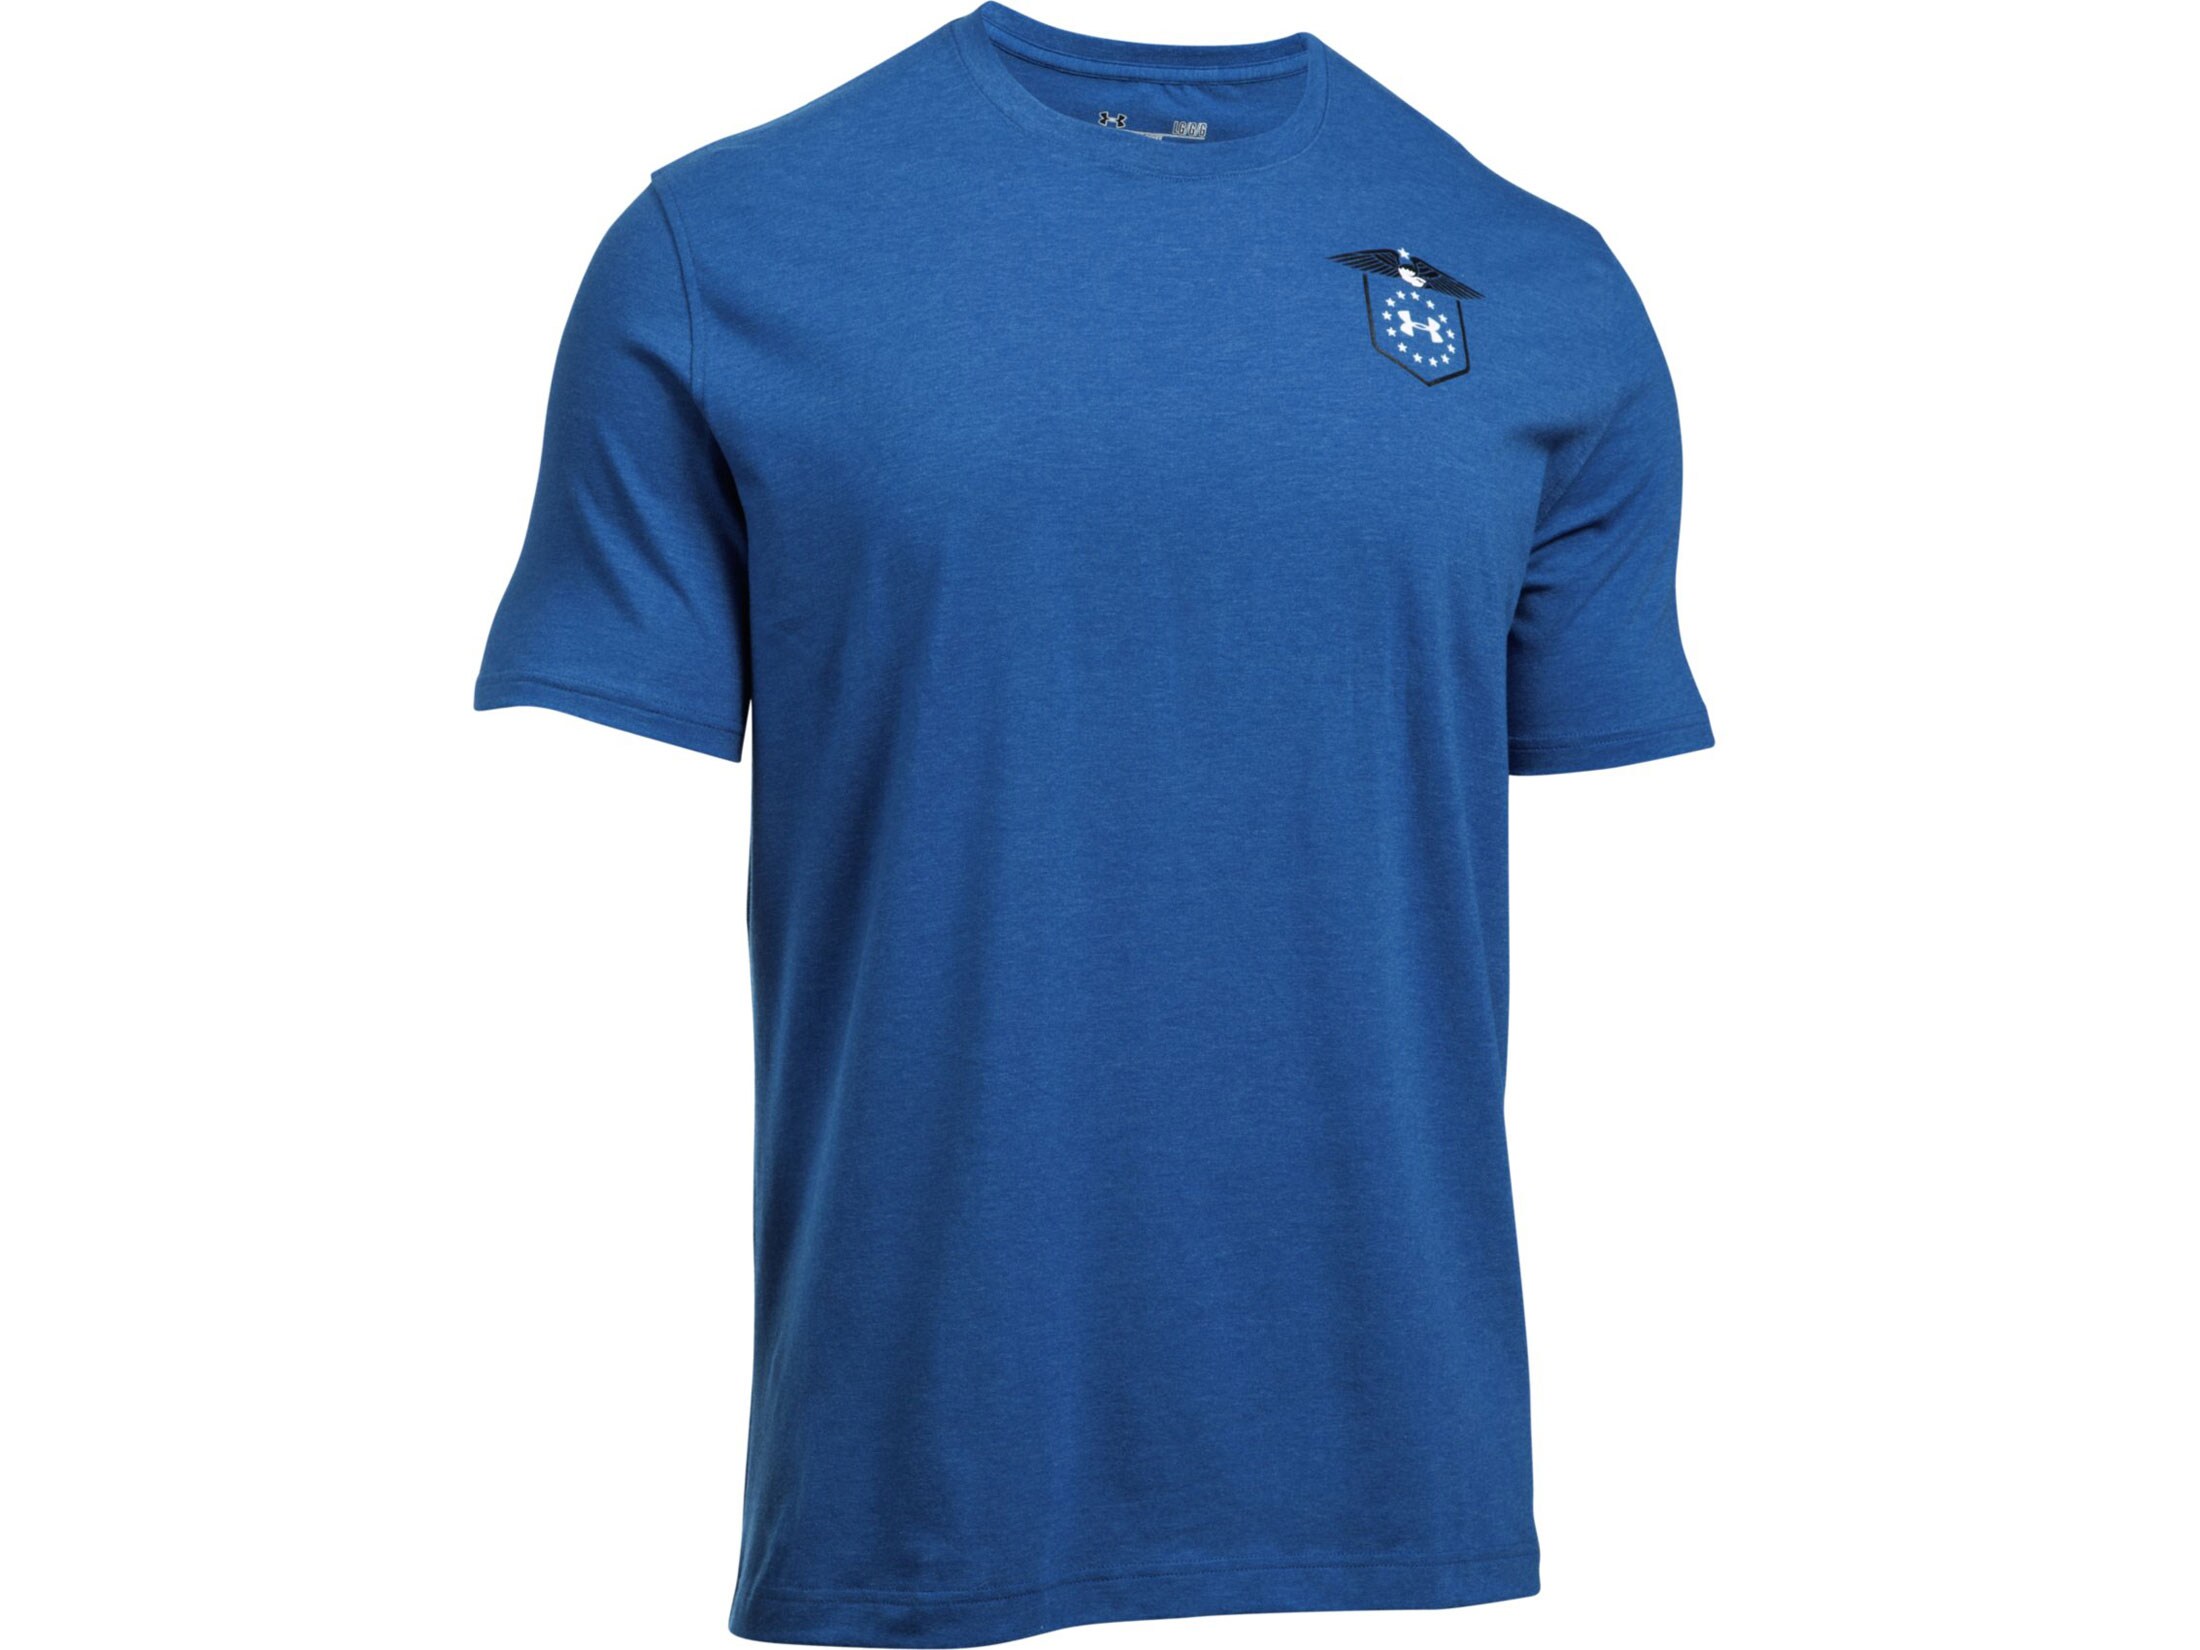 Under Armour Men's UA Home of the Brave T-Shirt Short Sleeve Charged